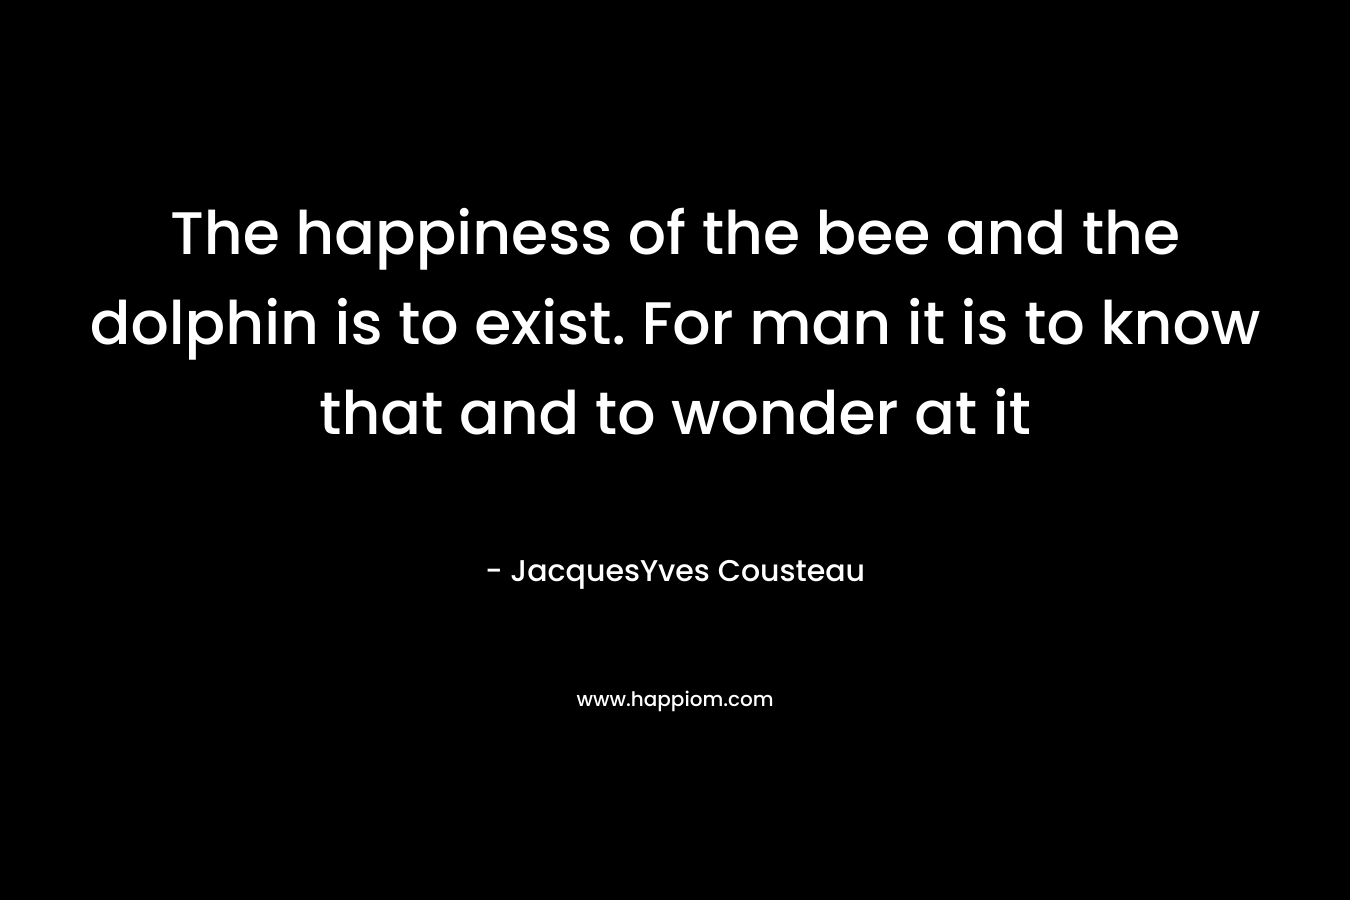 The happiness of the bee and the dolphin is to exist. For man it is to know that and to wonder at it